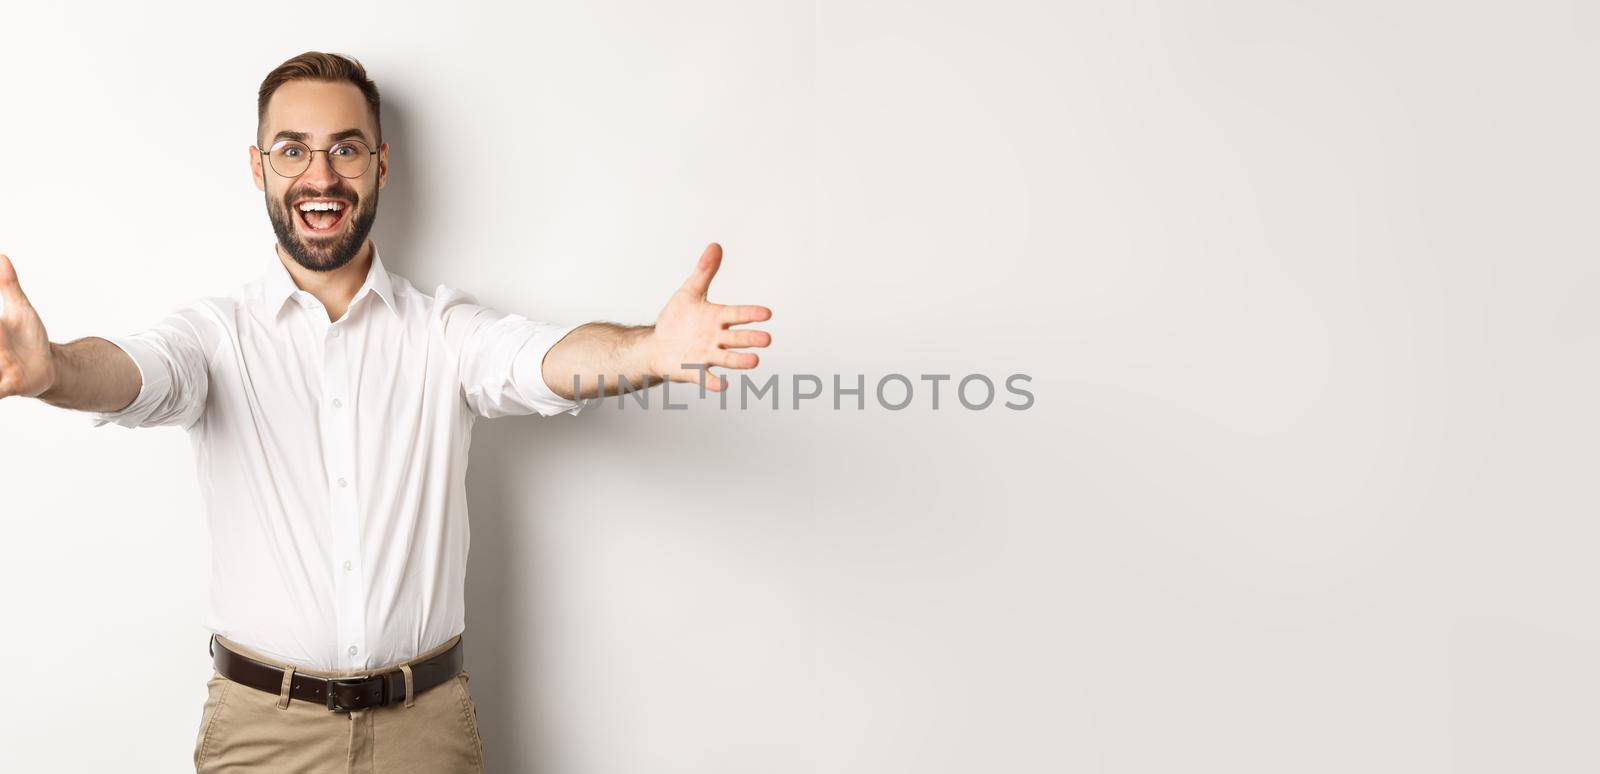 Happy man stretching hands in warm welcome, waiting for hug or greeting someone, standing over white background.